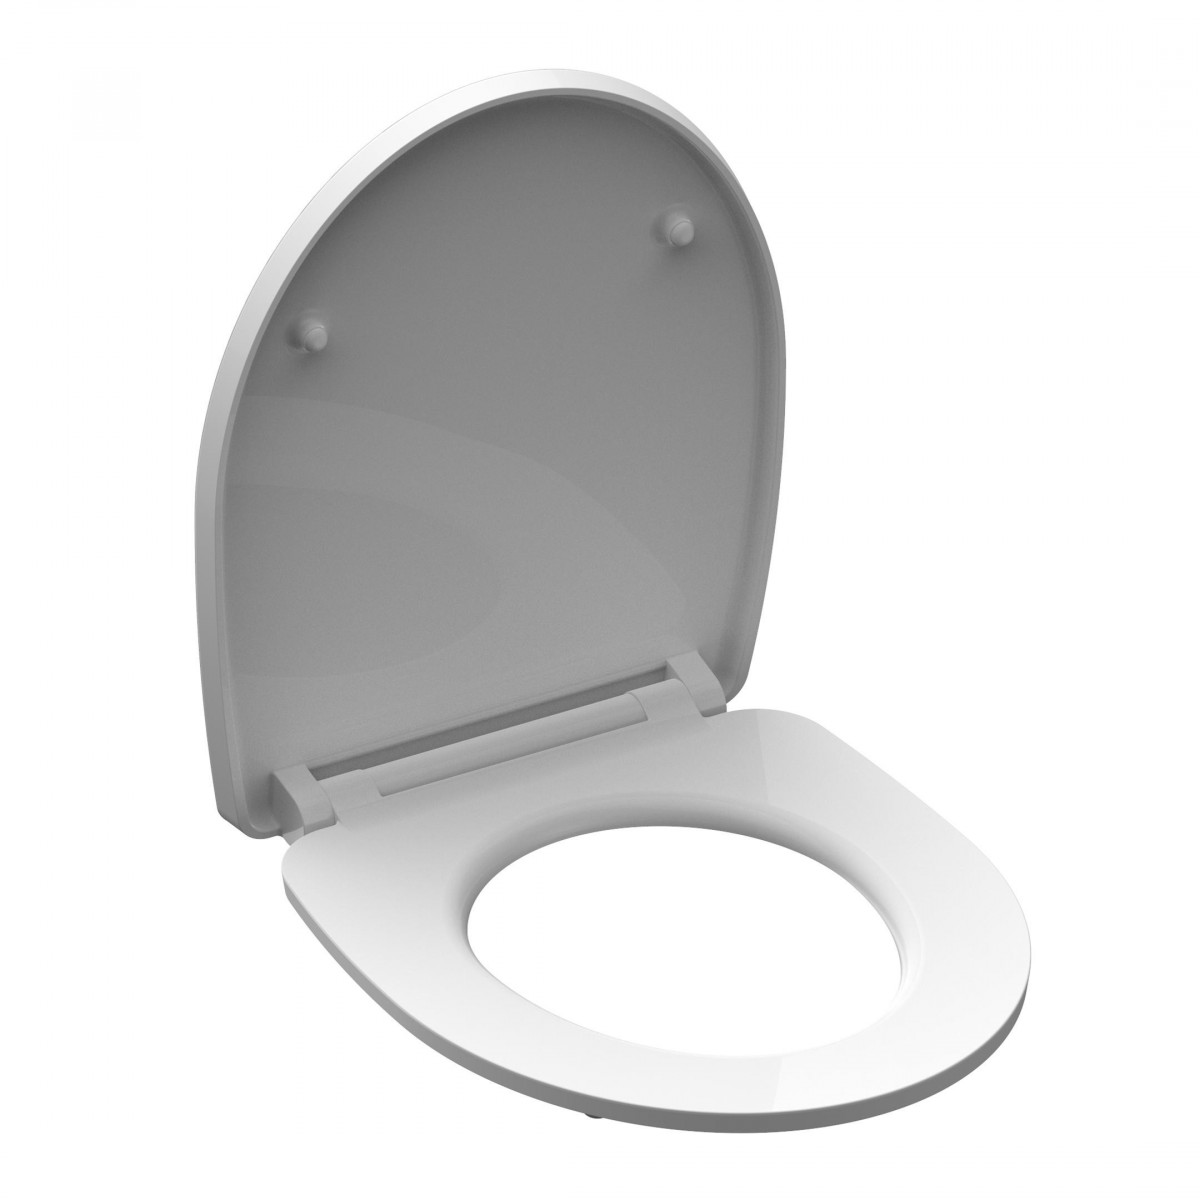 Duroplast HG Toilet Seat MAGIC LIGHT with Soft Close and Quick Release